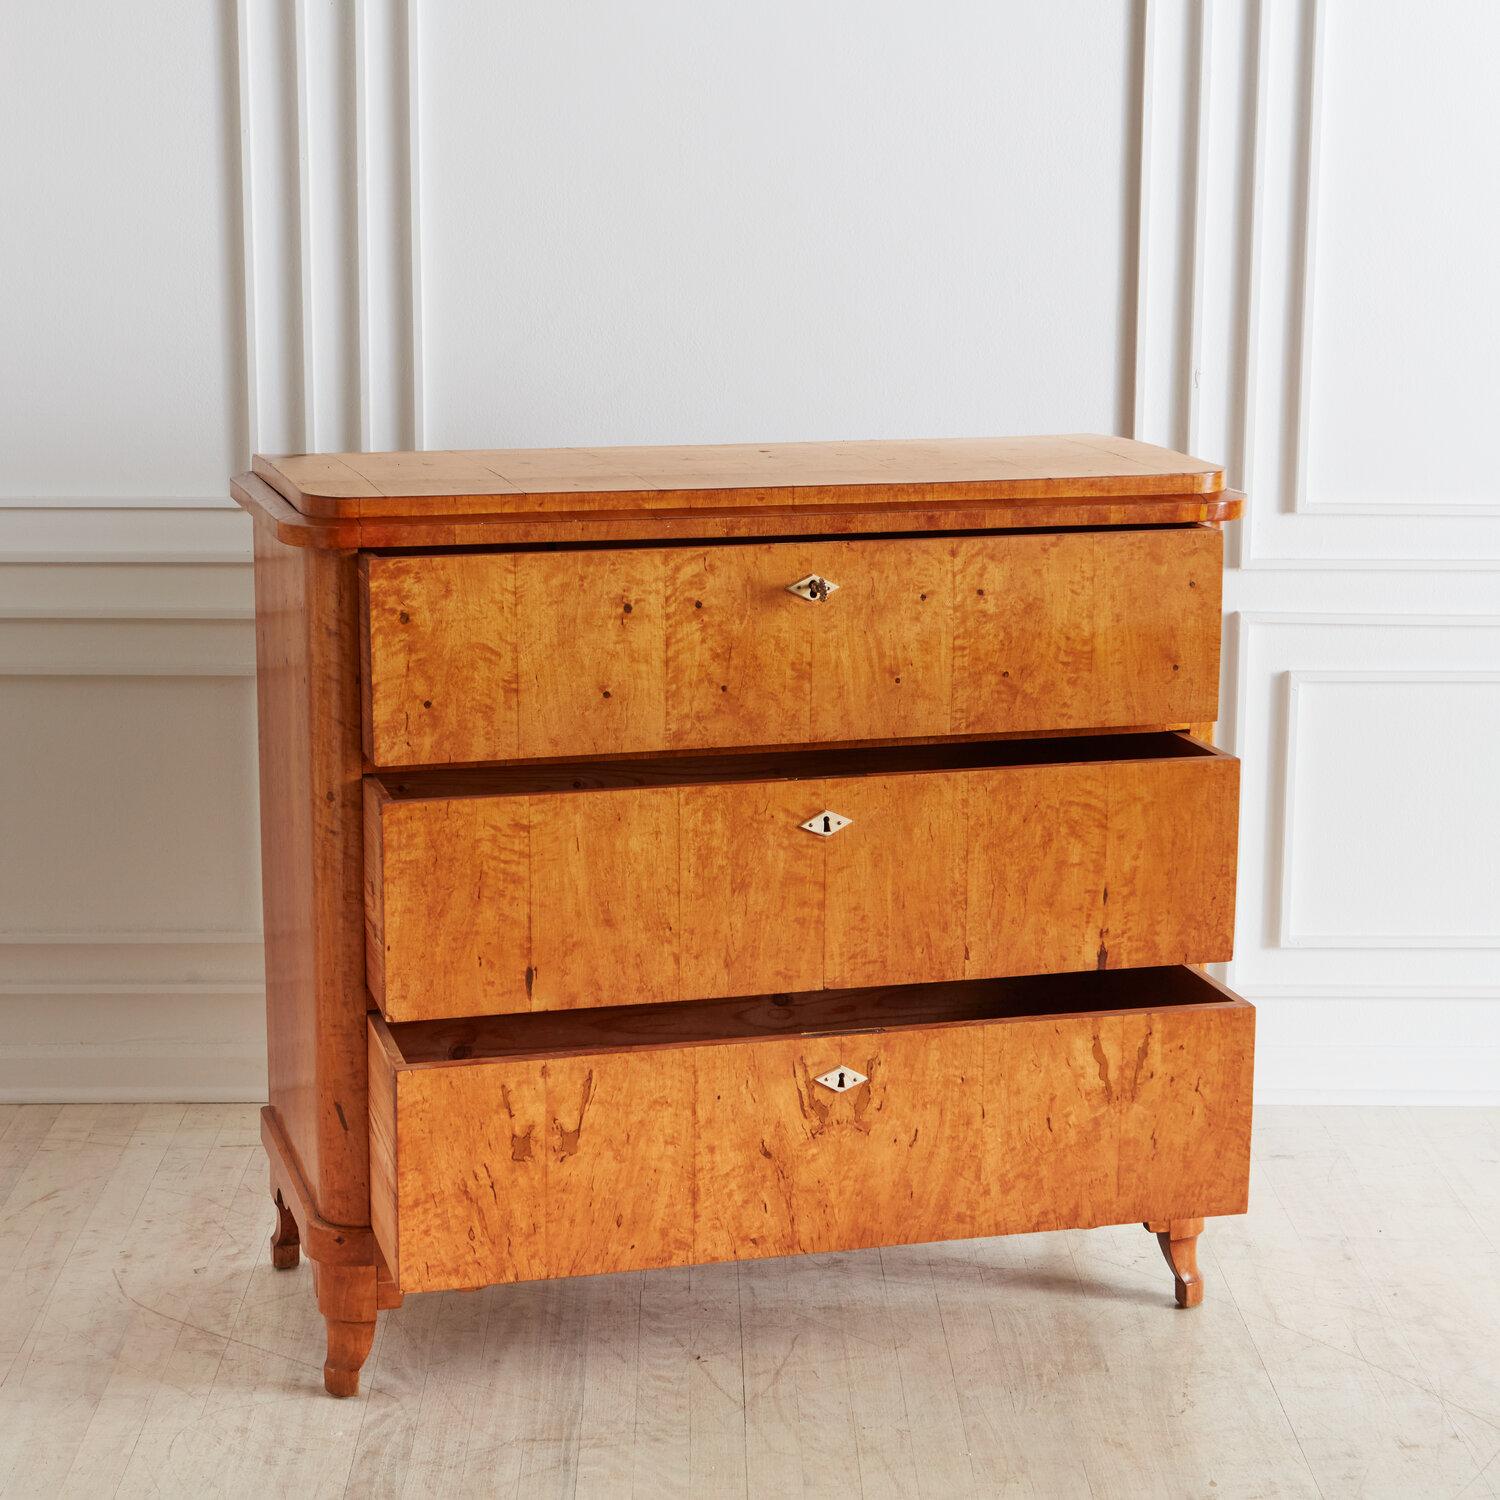 A 19th century chest of three drawers in the Biedermeier style; featuring three drawers each with a lock that a single key (included) can lock or unlock. The key is used to open the drawers. Nested inside the top drawers are four smaller jewelry